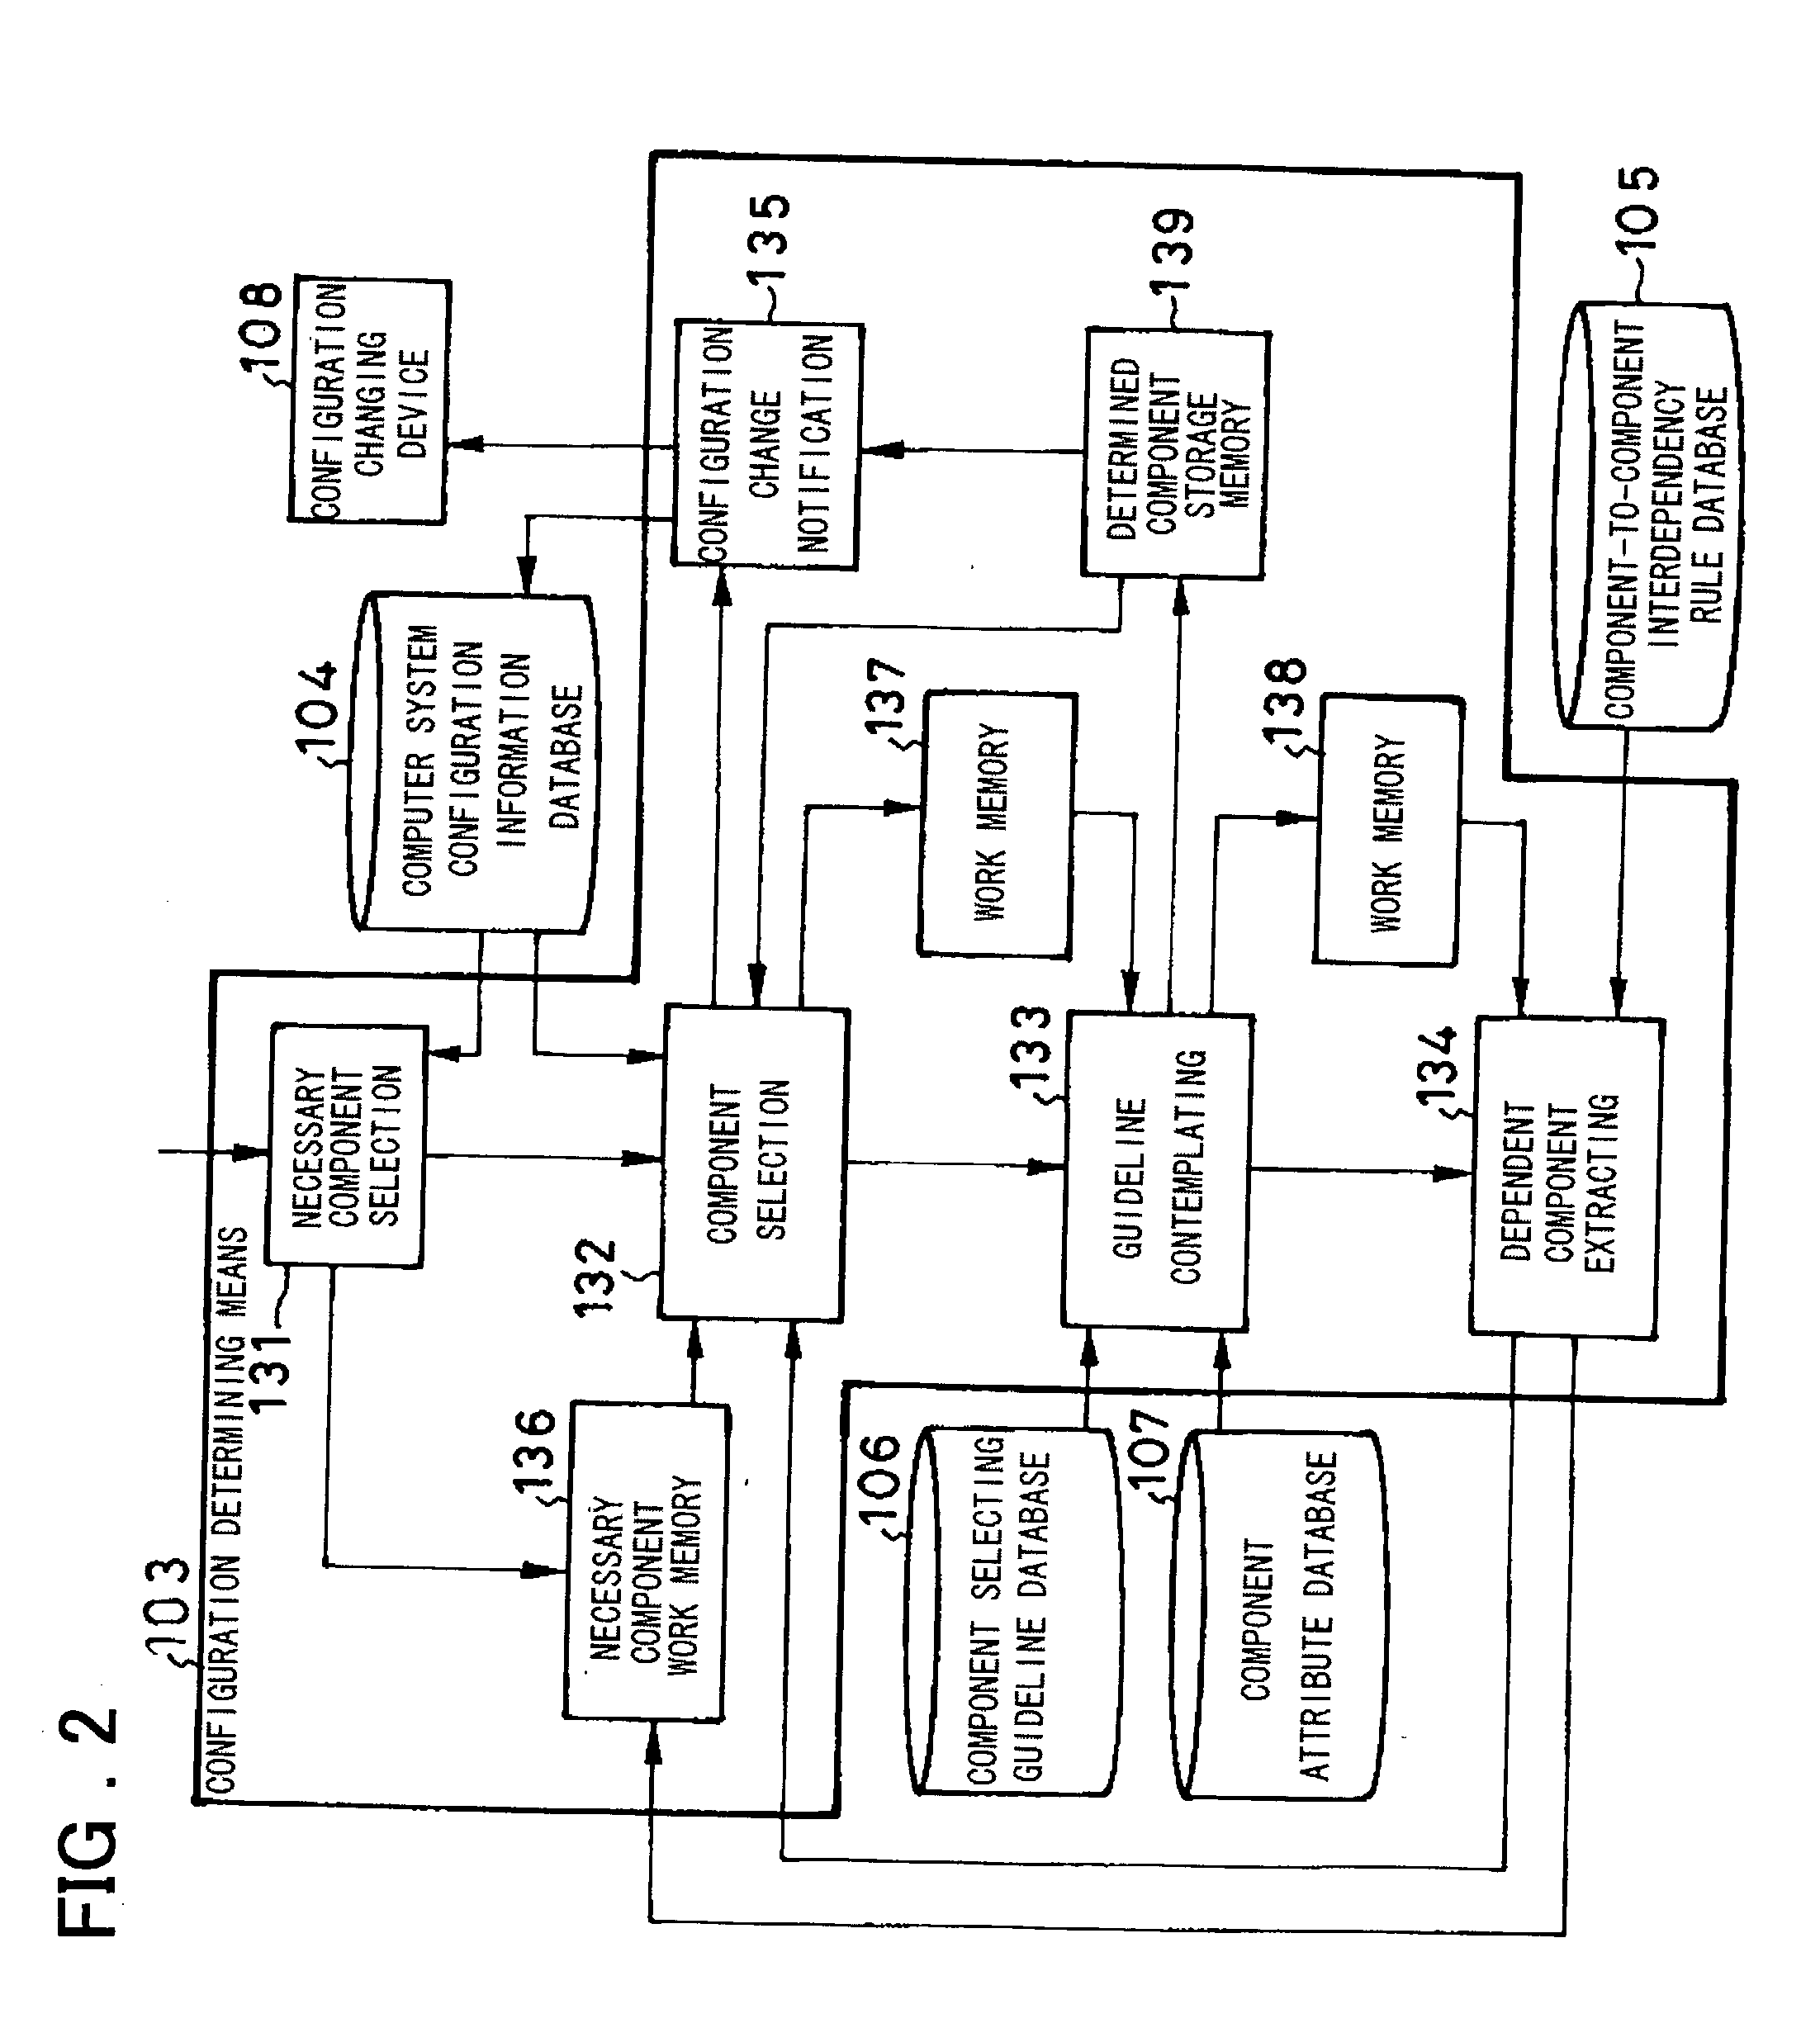 System for automatically changing computer system configuration